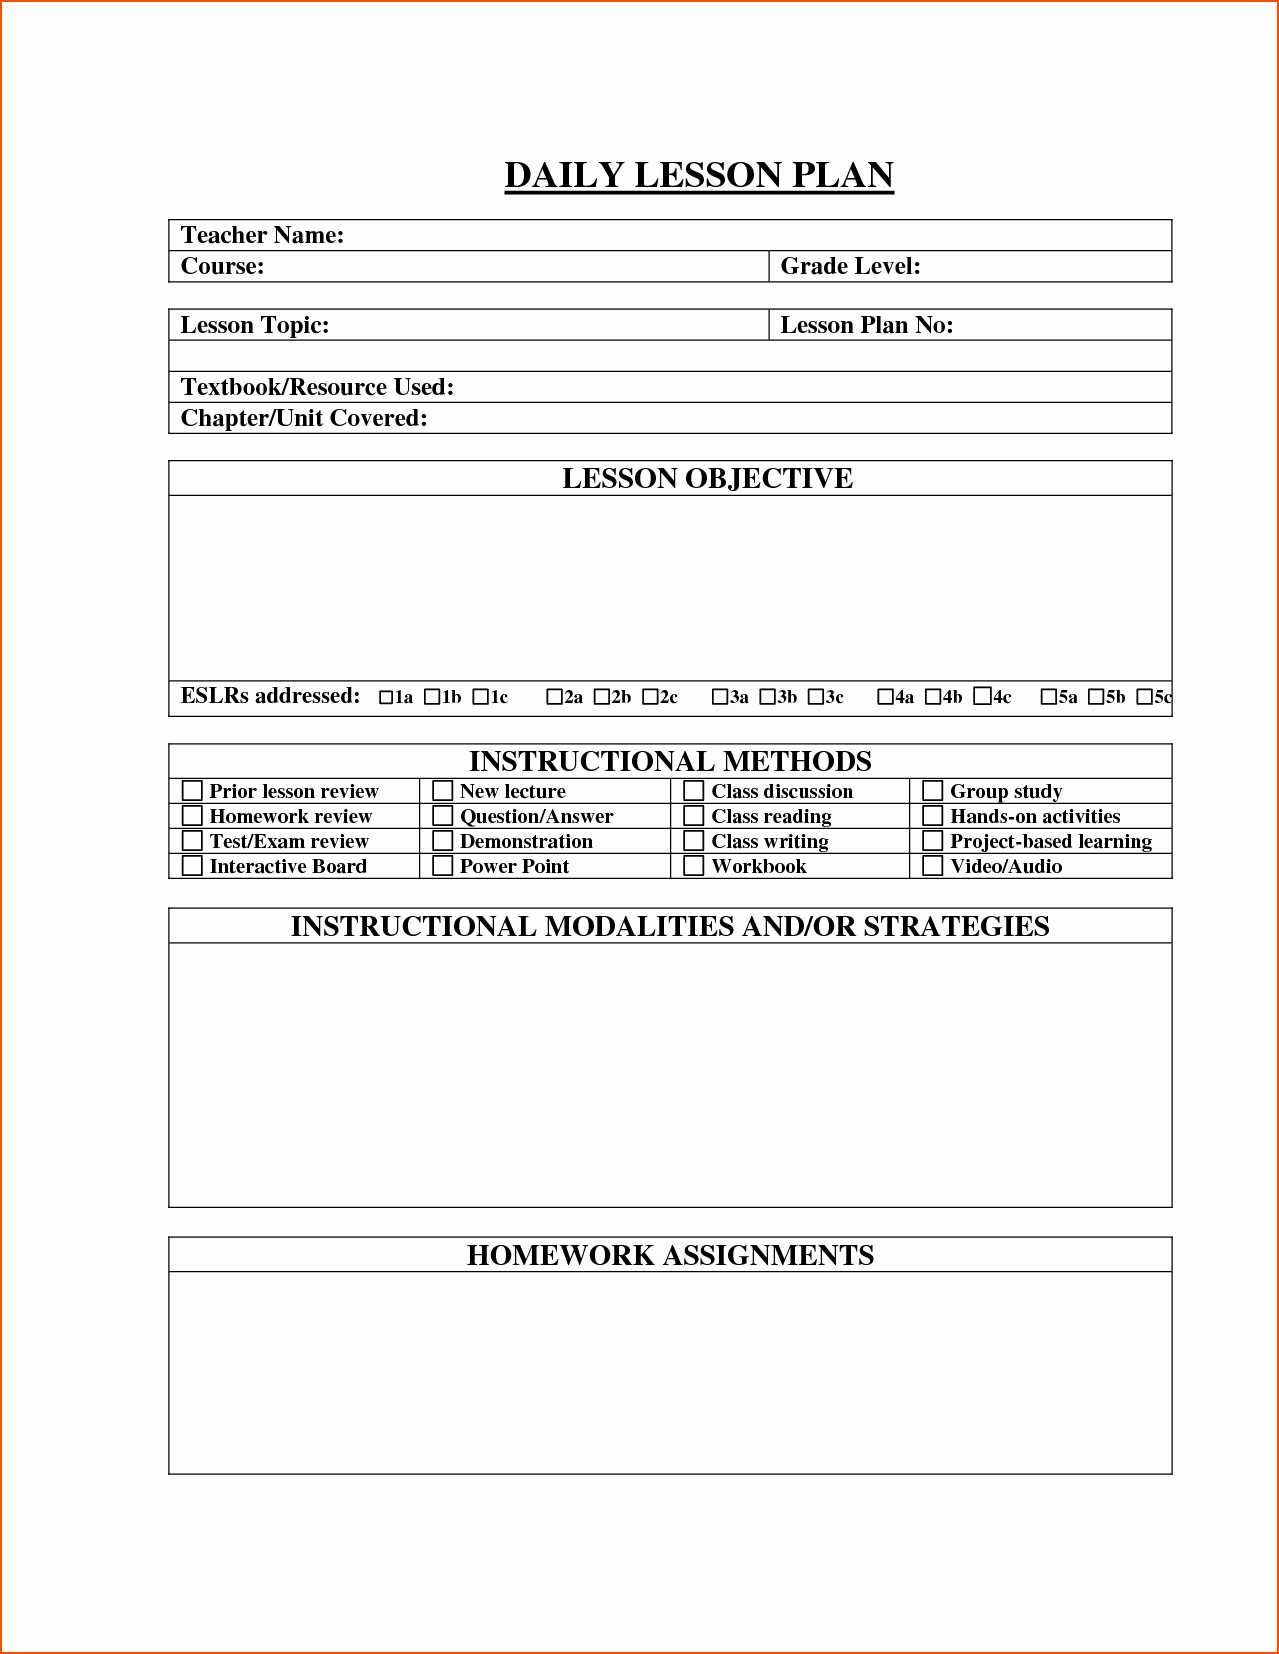 Lesson Plan Template Daily New 6 Daily Lesson Plan Template Bookletemplate